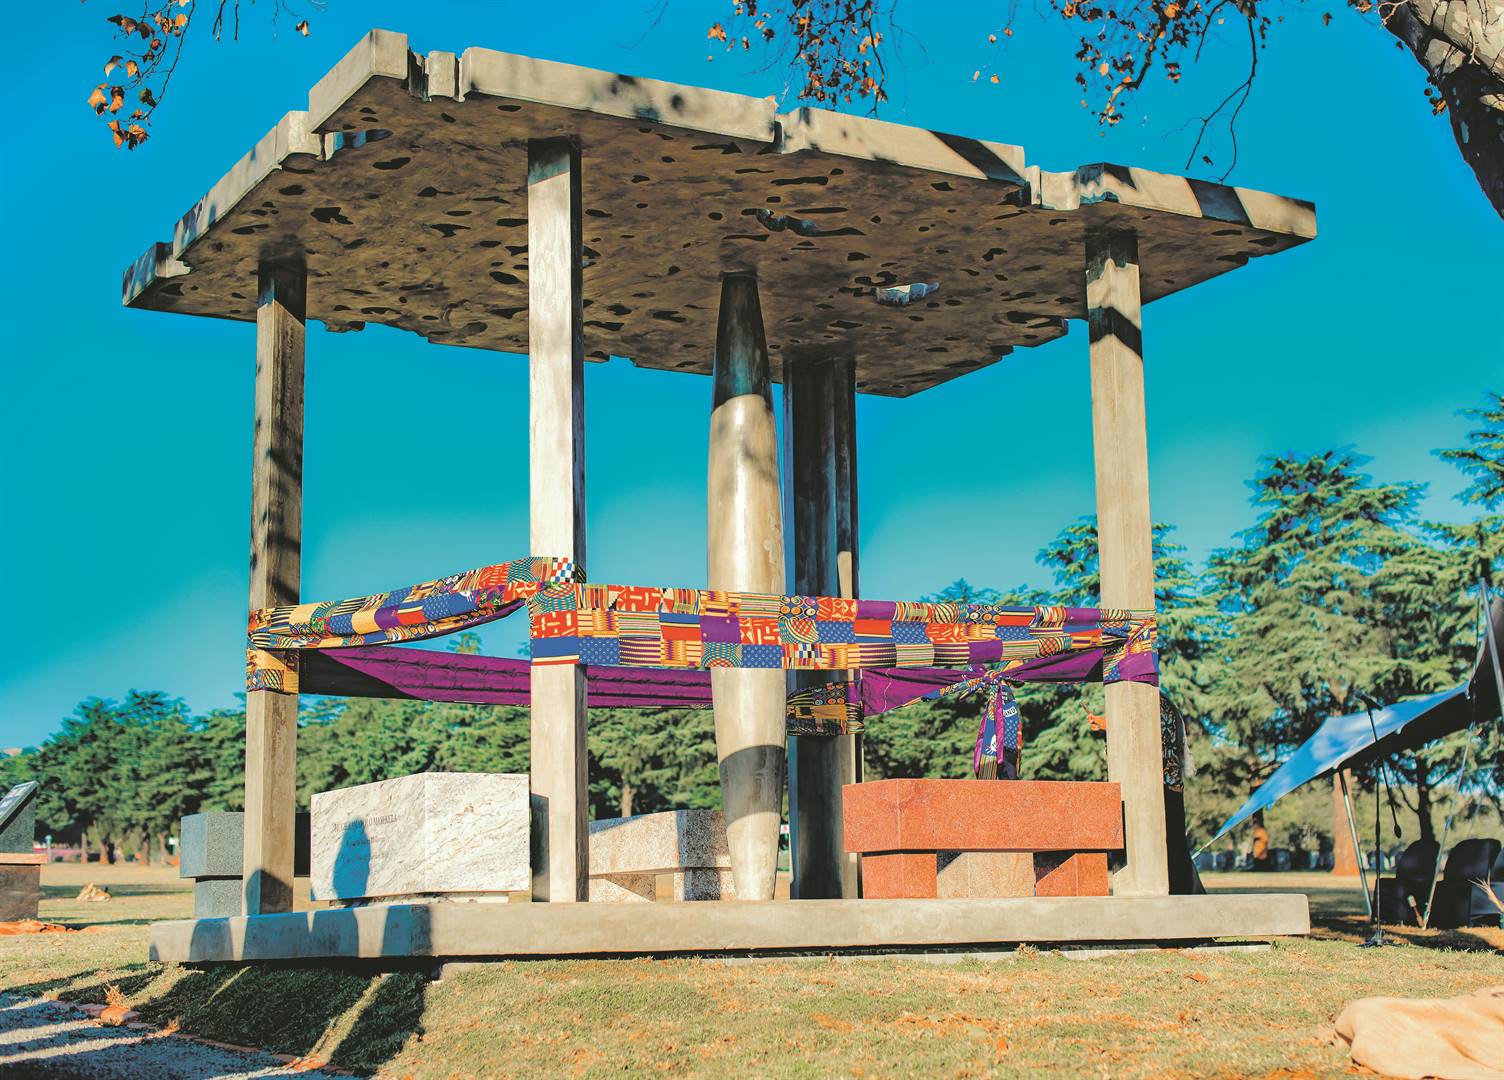 Hugh Masekela’s pavilion is pictured during his unveiling at the West Park Cemetery in Randburg, Johannesburg